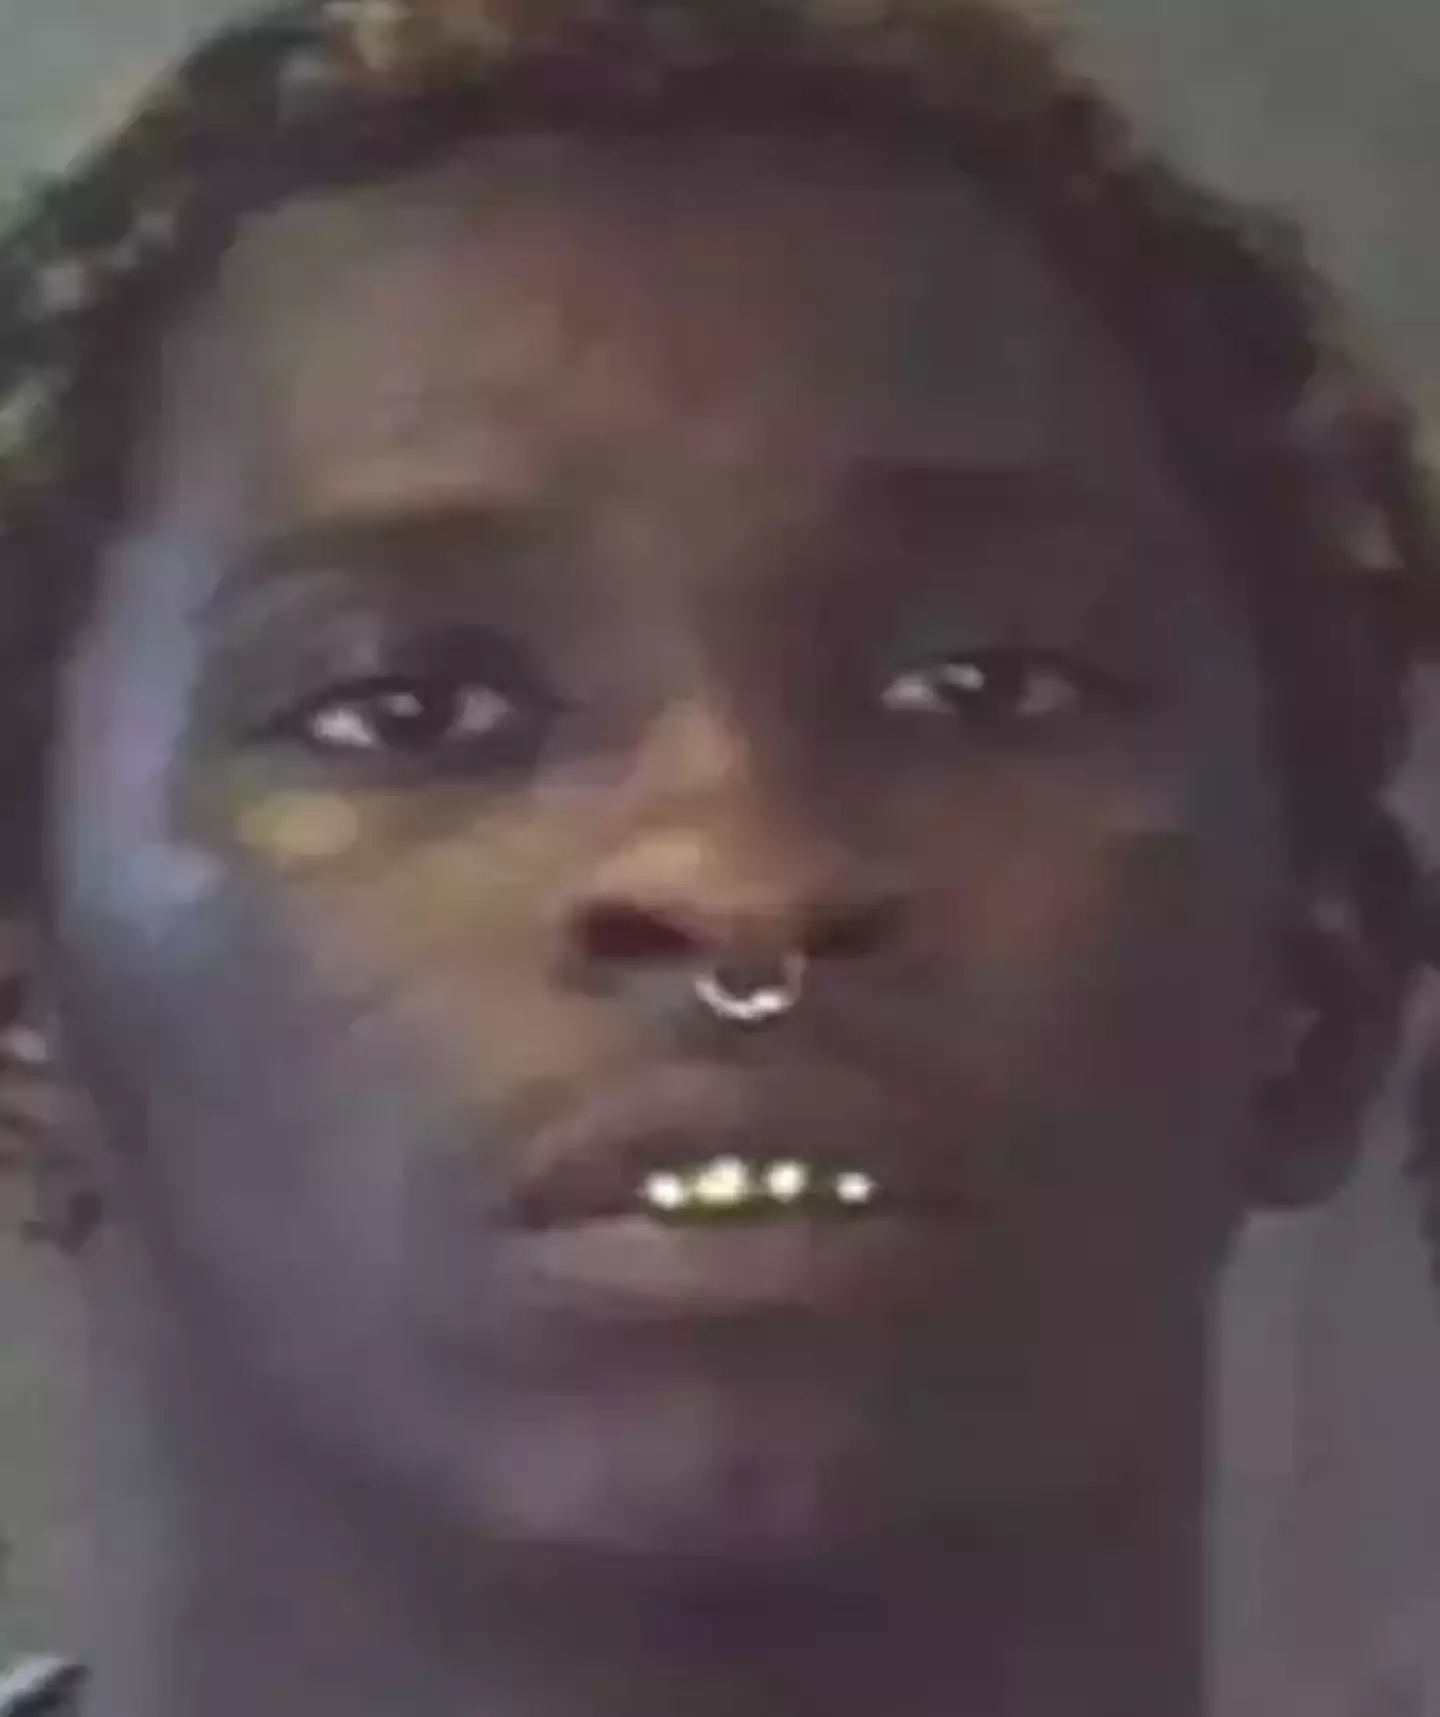 Young Thug was arrested at his home last year.